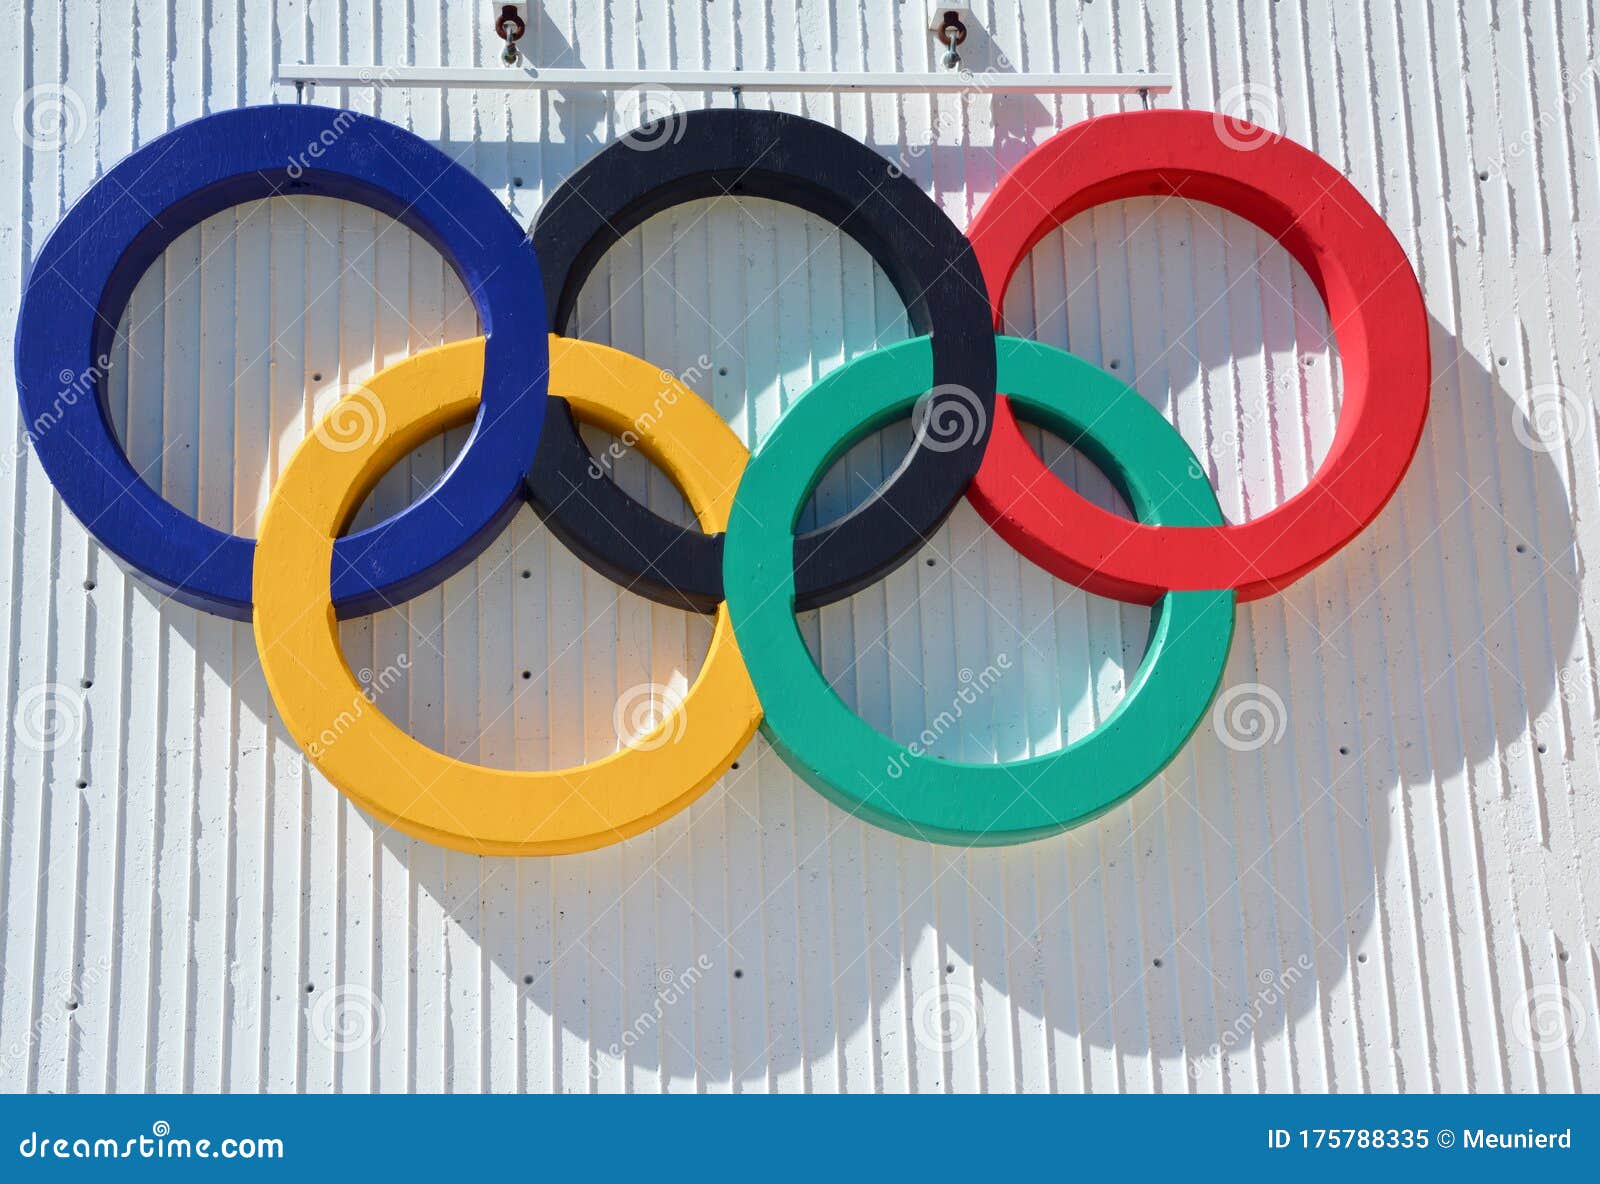 Image of Olympic Rings over Canada | Stock Image MXI21483